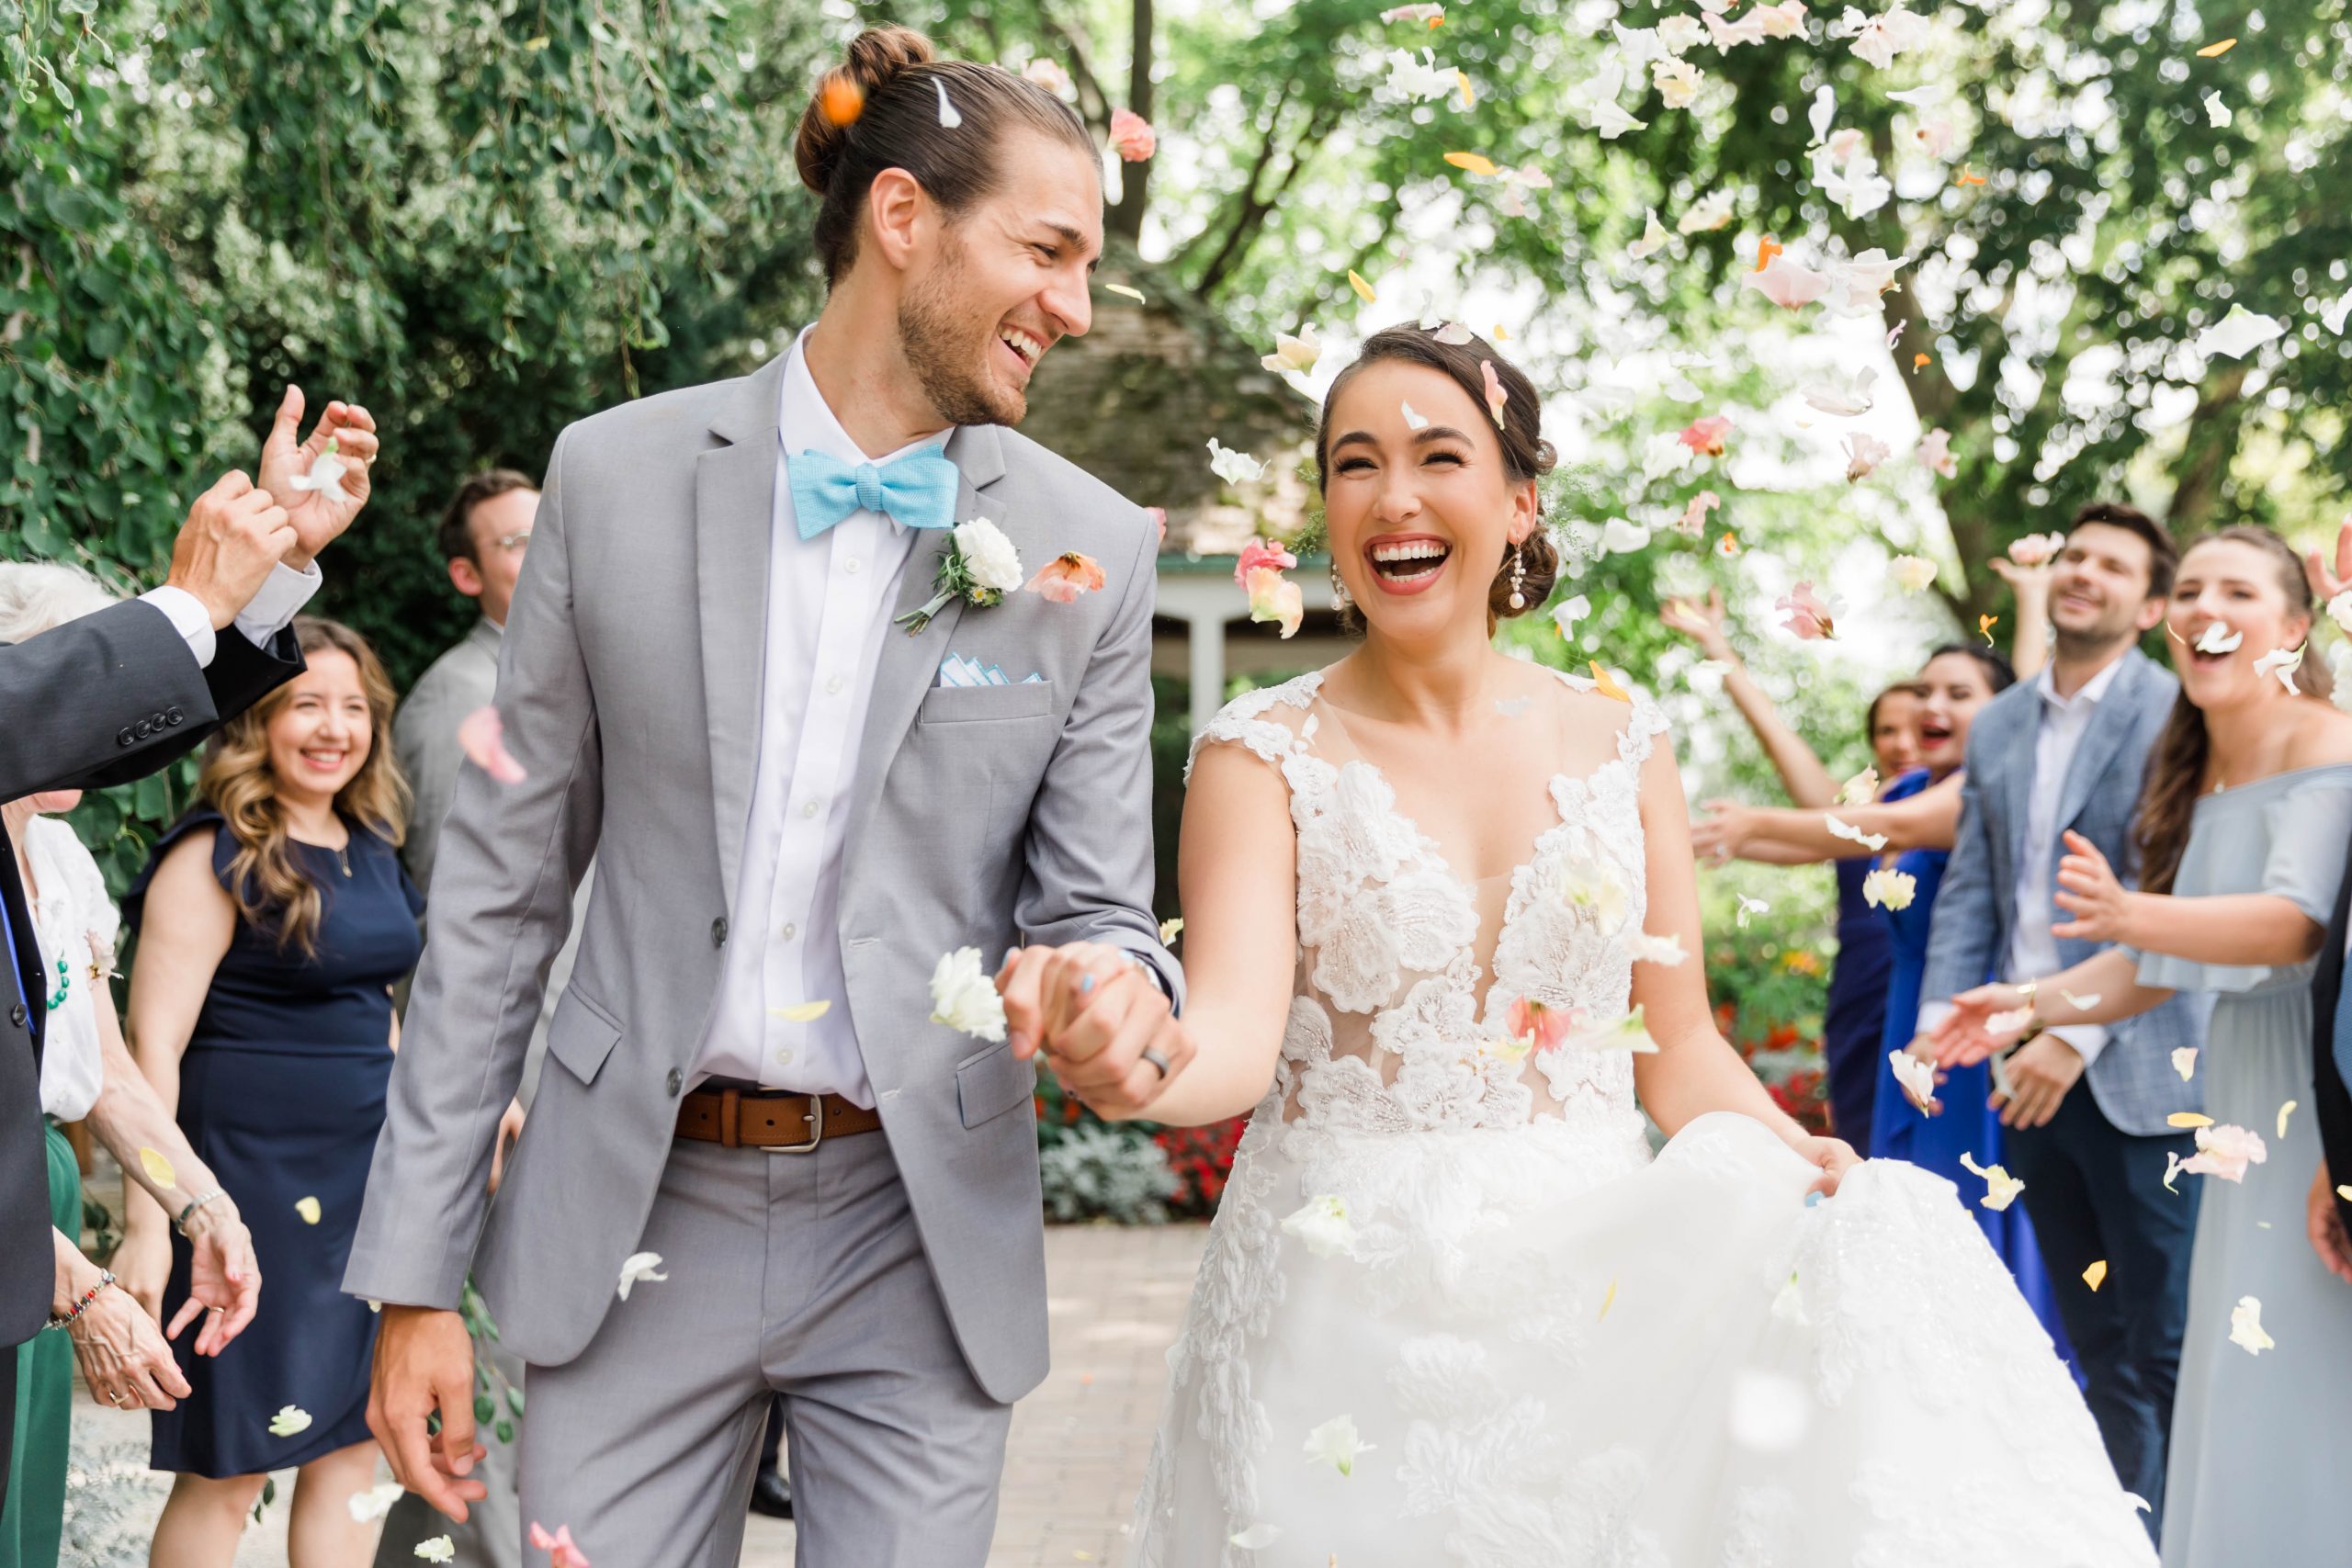 Bride and Groom smiling as petals rain around them in a garden